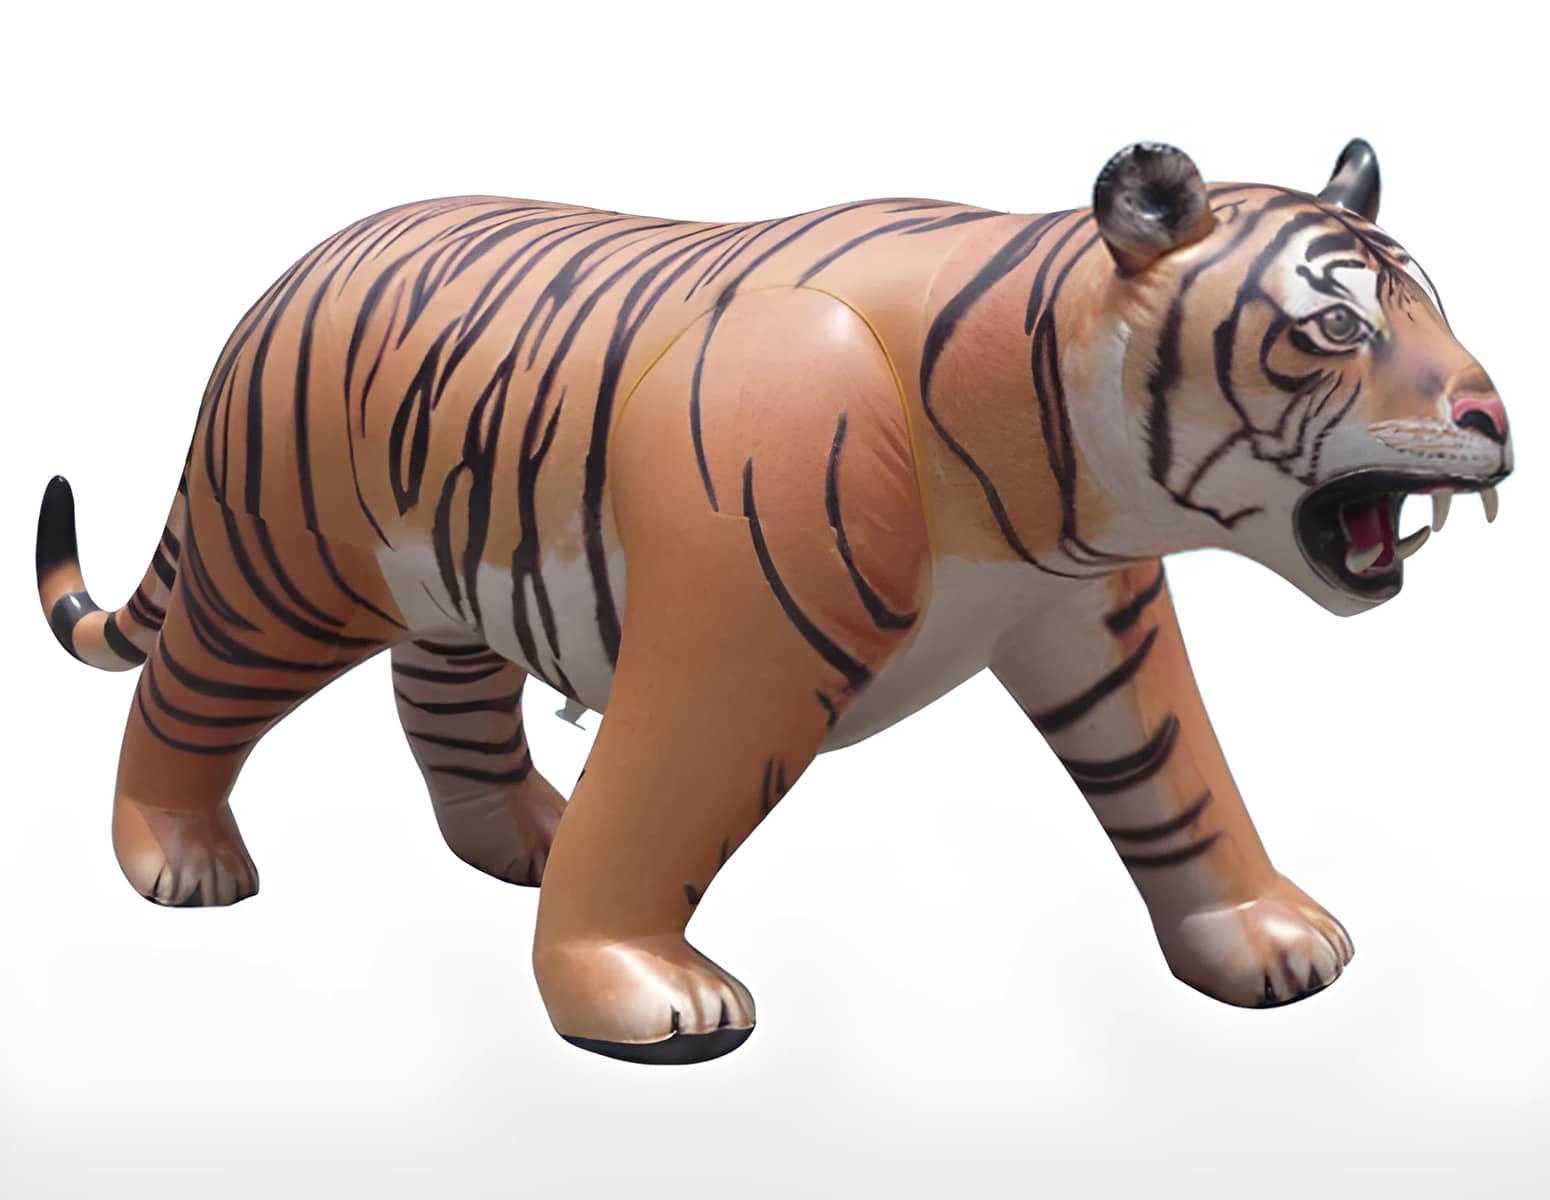 48"  WhiteTiger New Vinyl Blow Up Toy Inflate Jungle Animal 